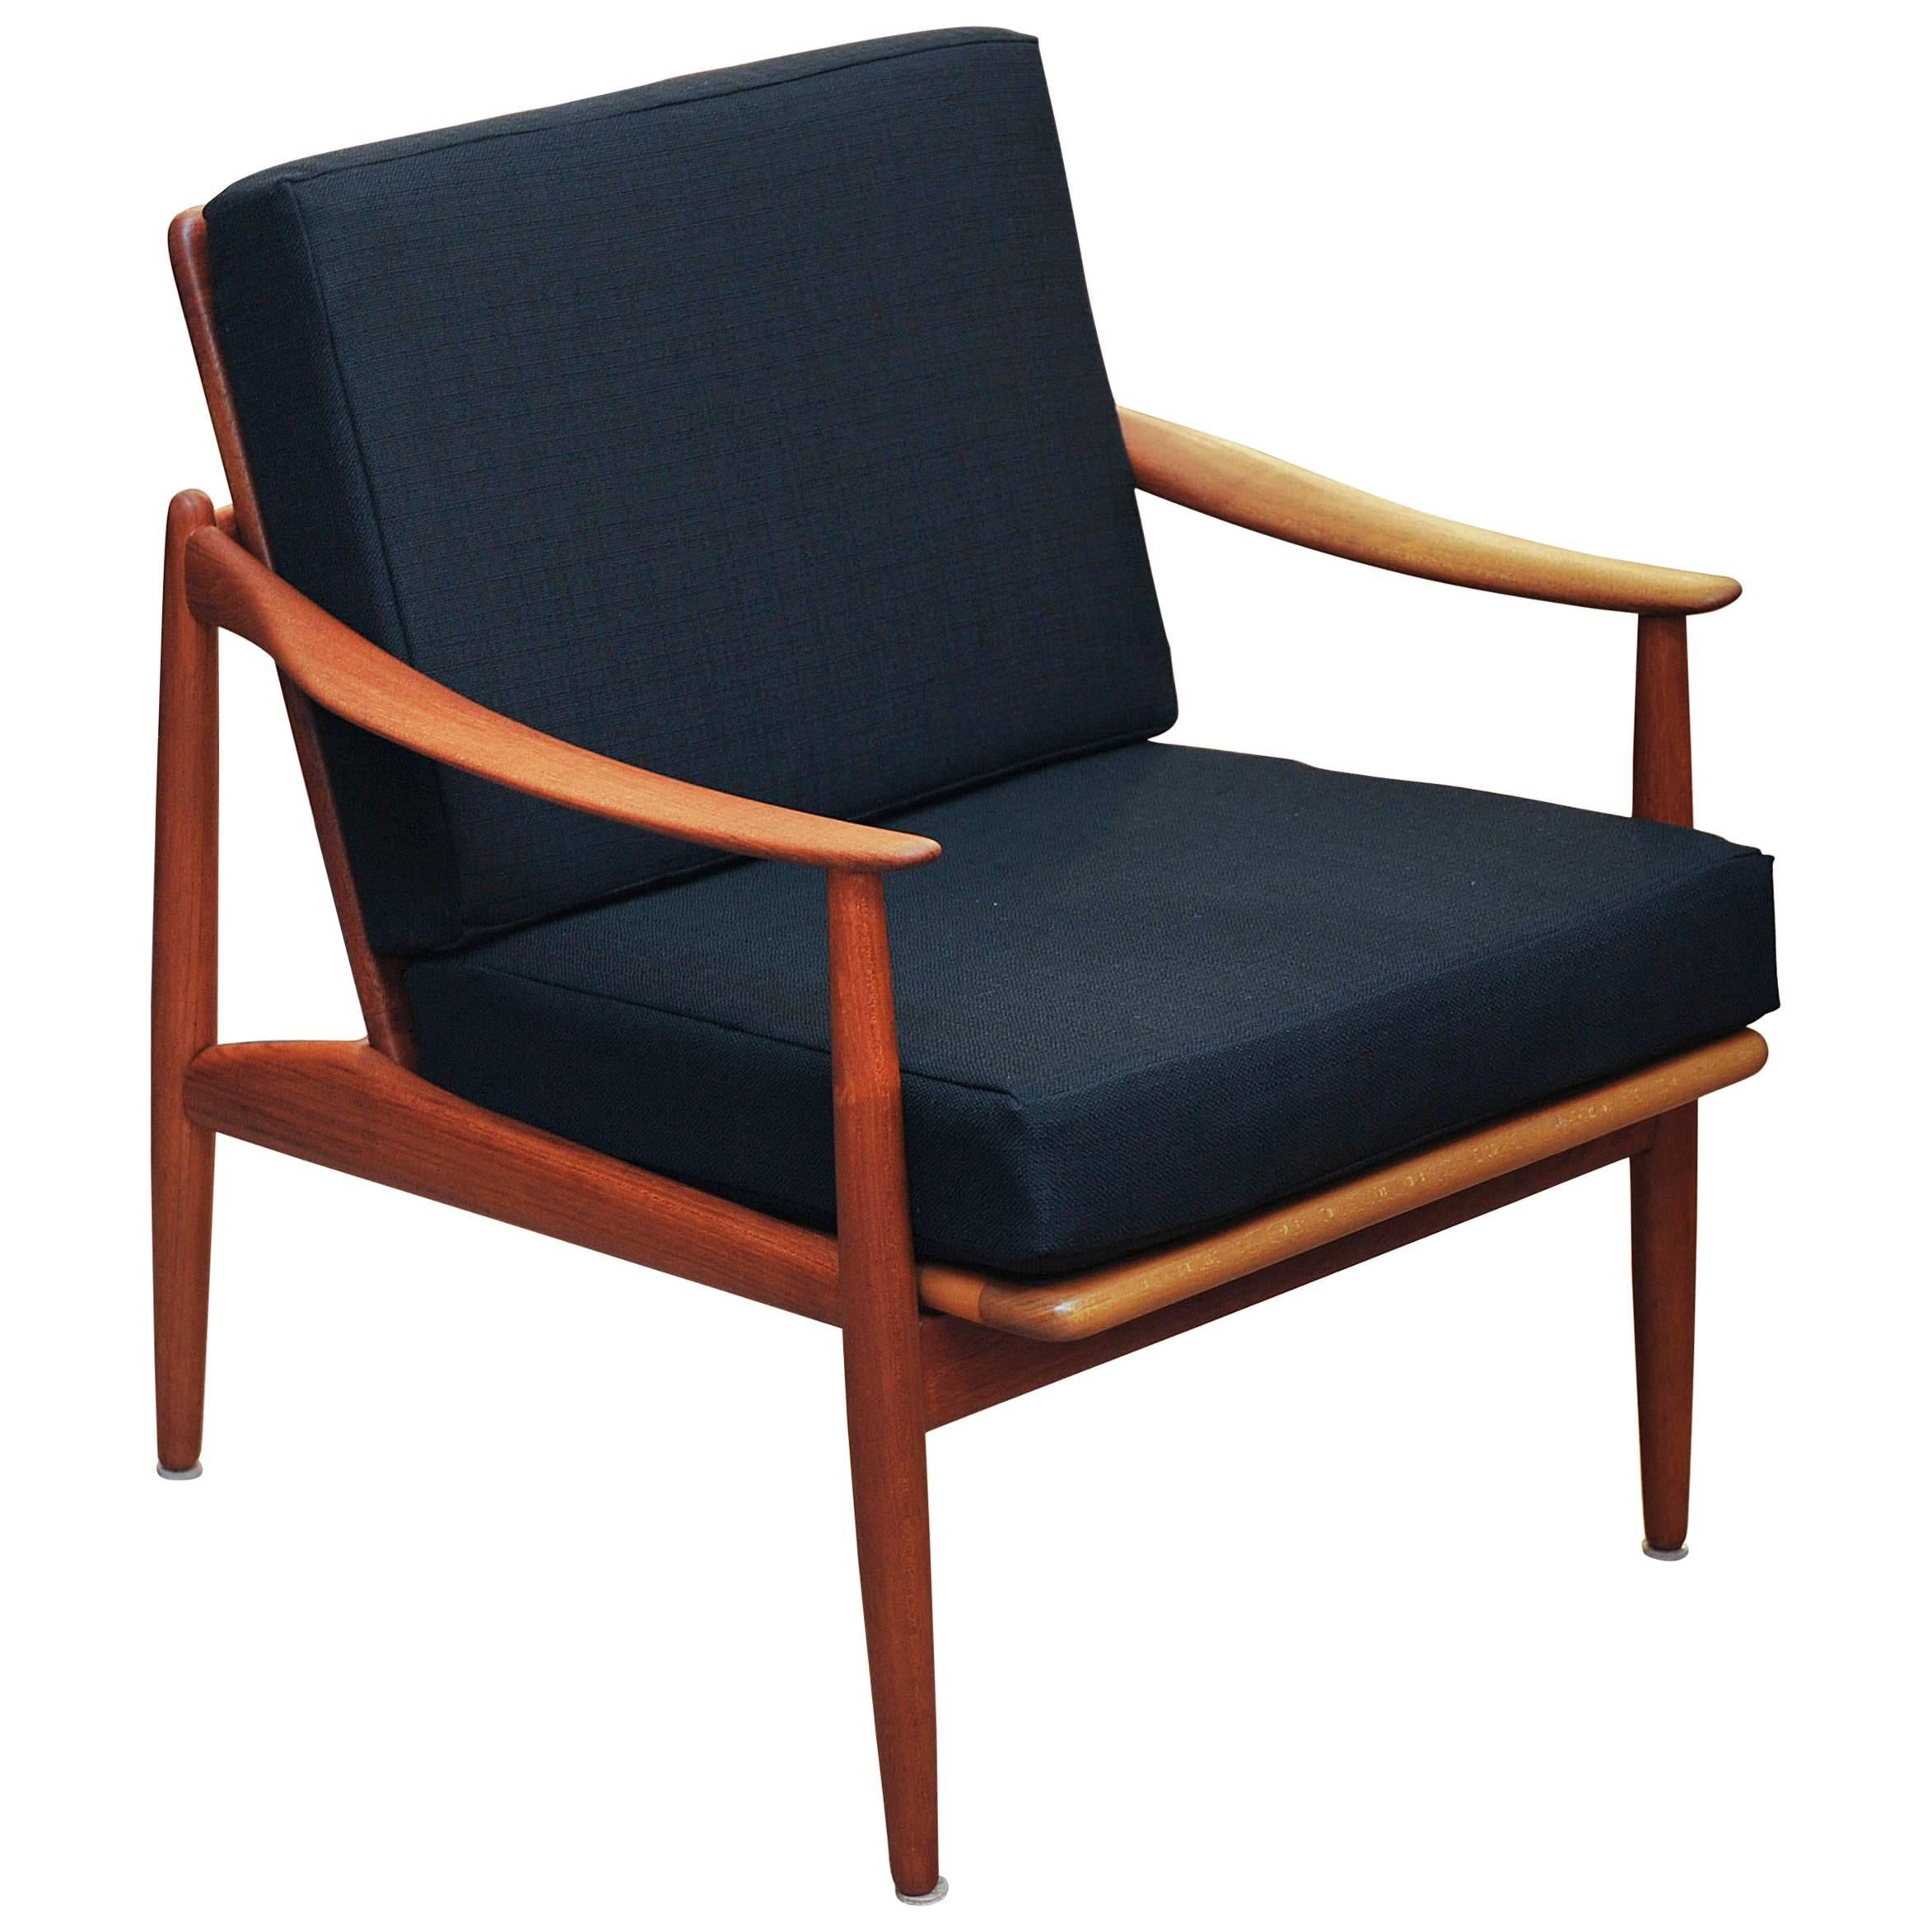 Reclining Lounge Chair Made in Norway